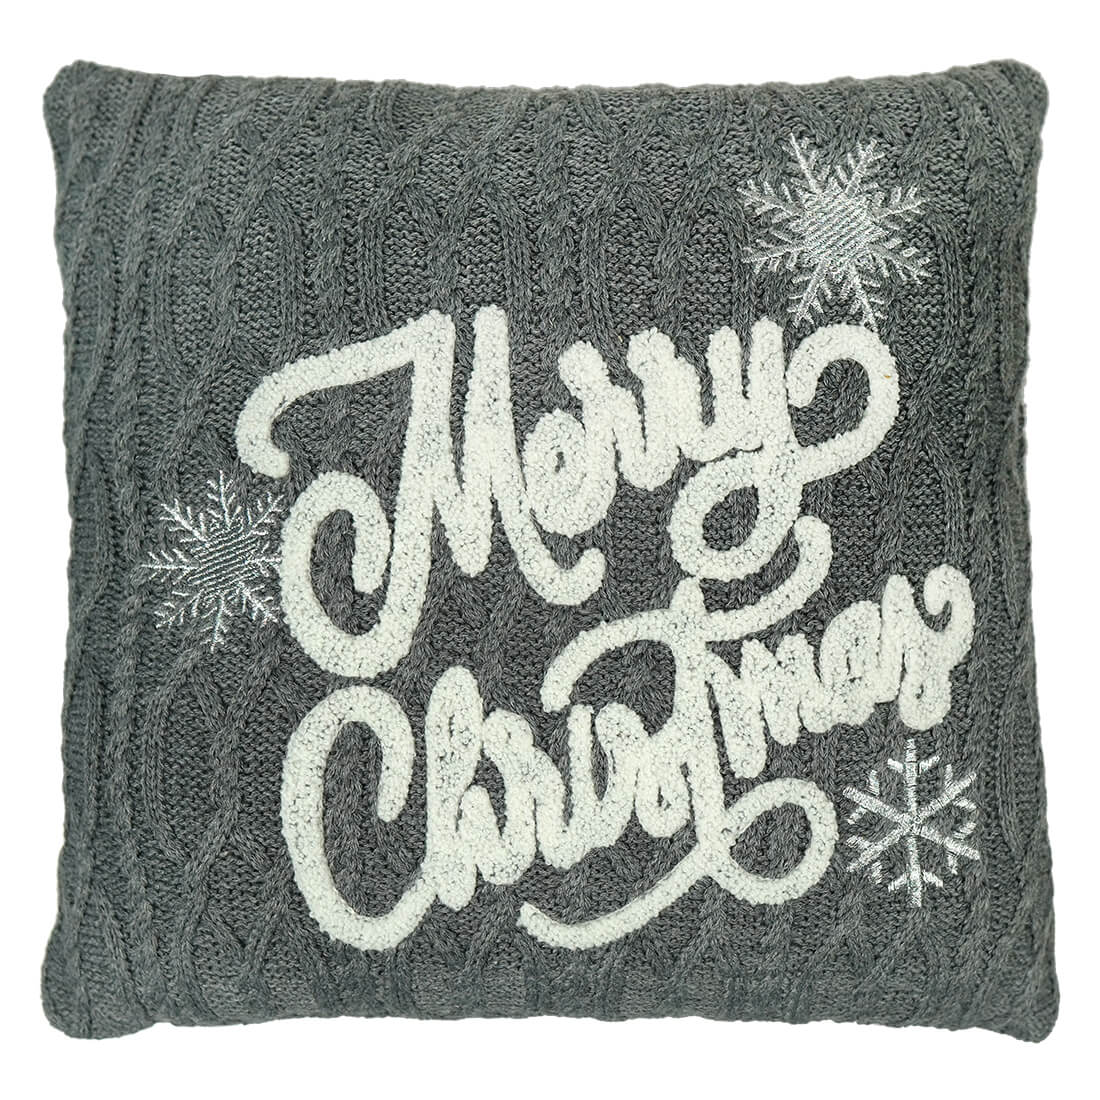 Knit Embroidery Merry Christmas Pillow